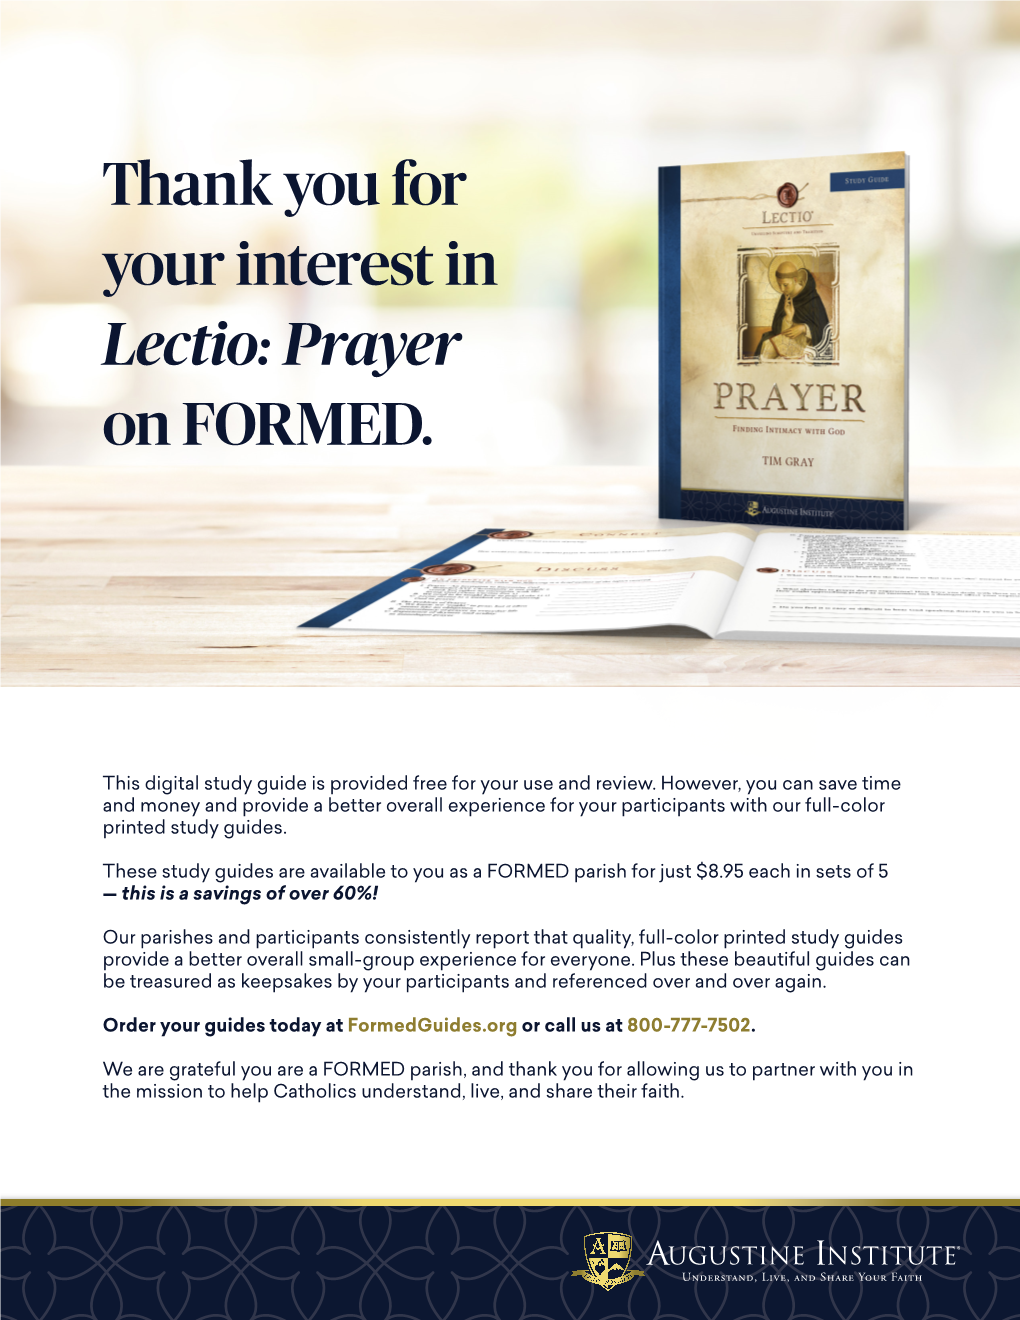 Thank You for Your Interest in Lectio: Prayer on FORMED